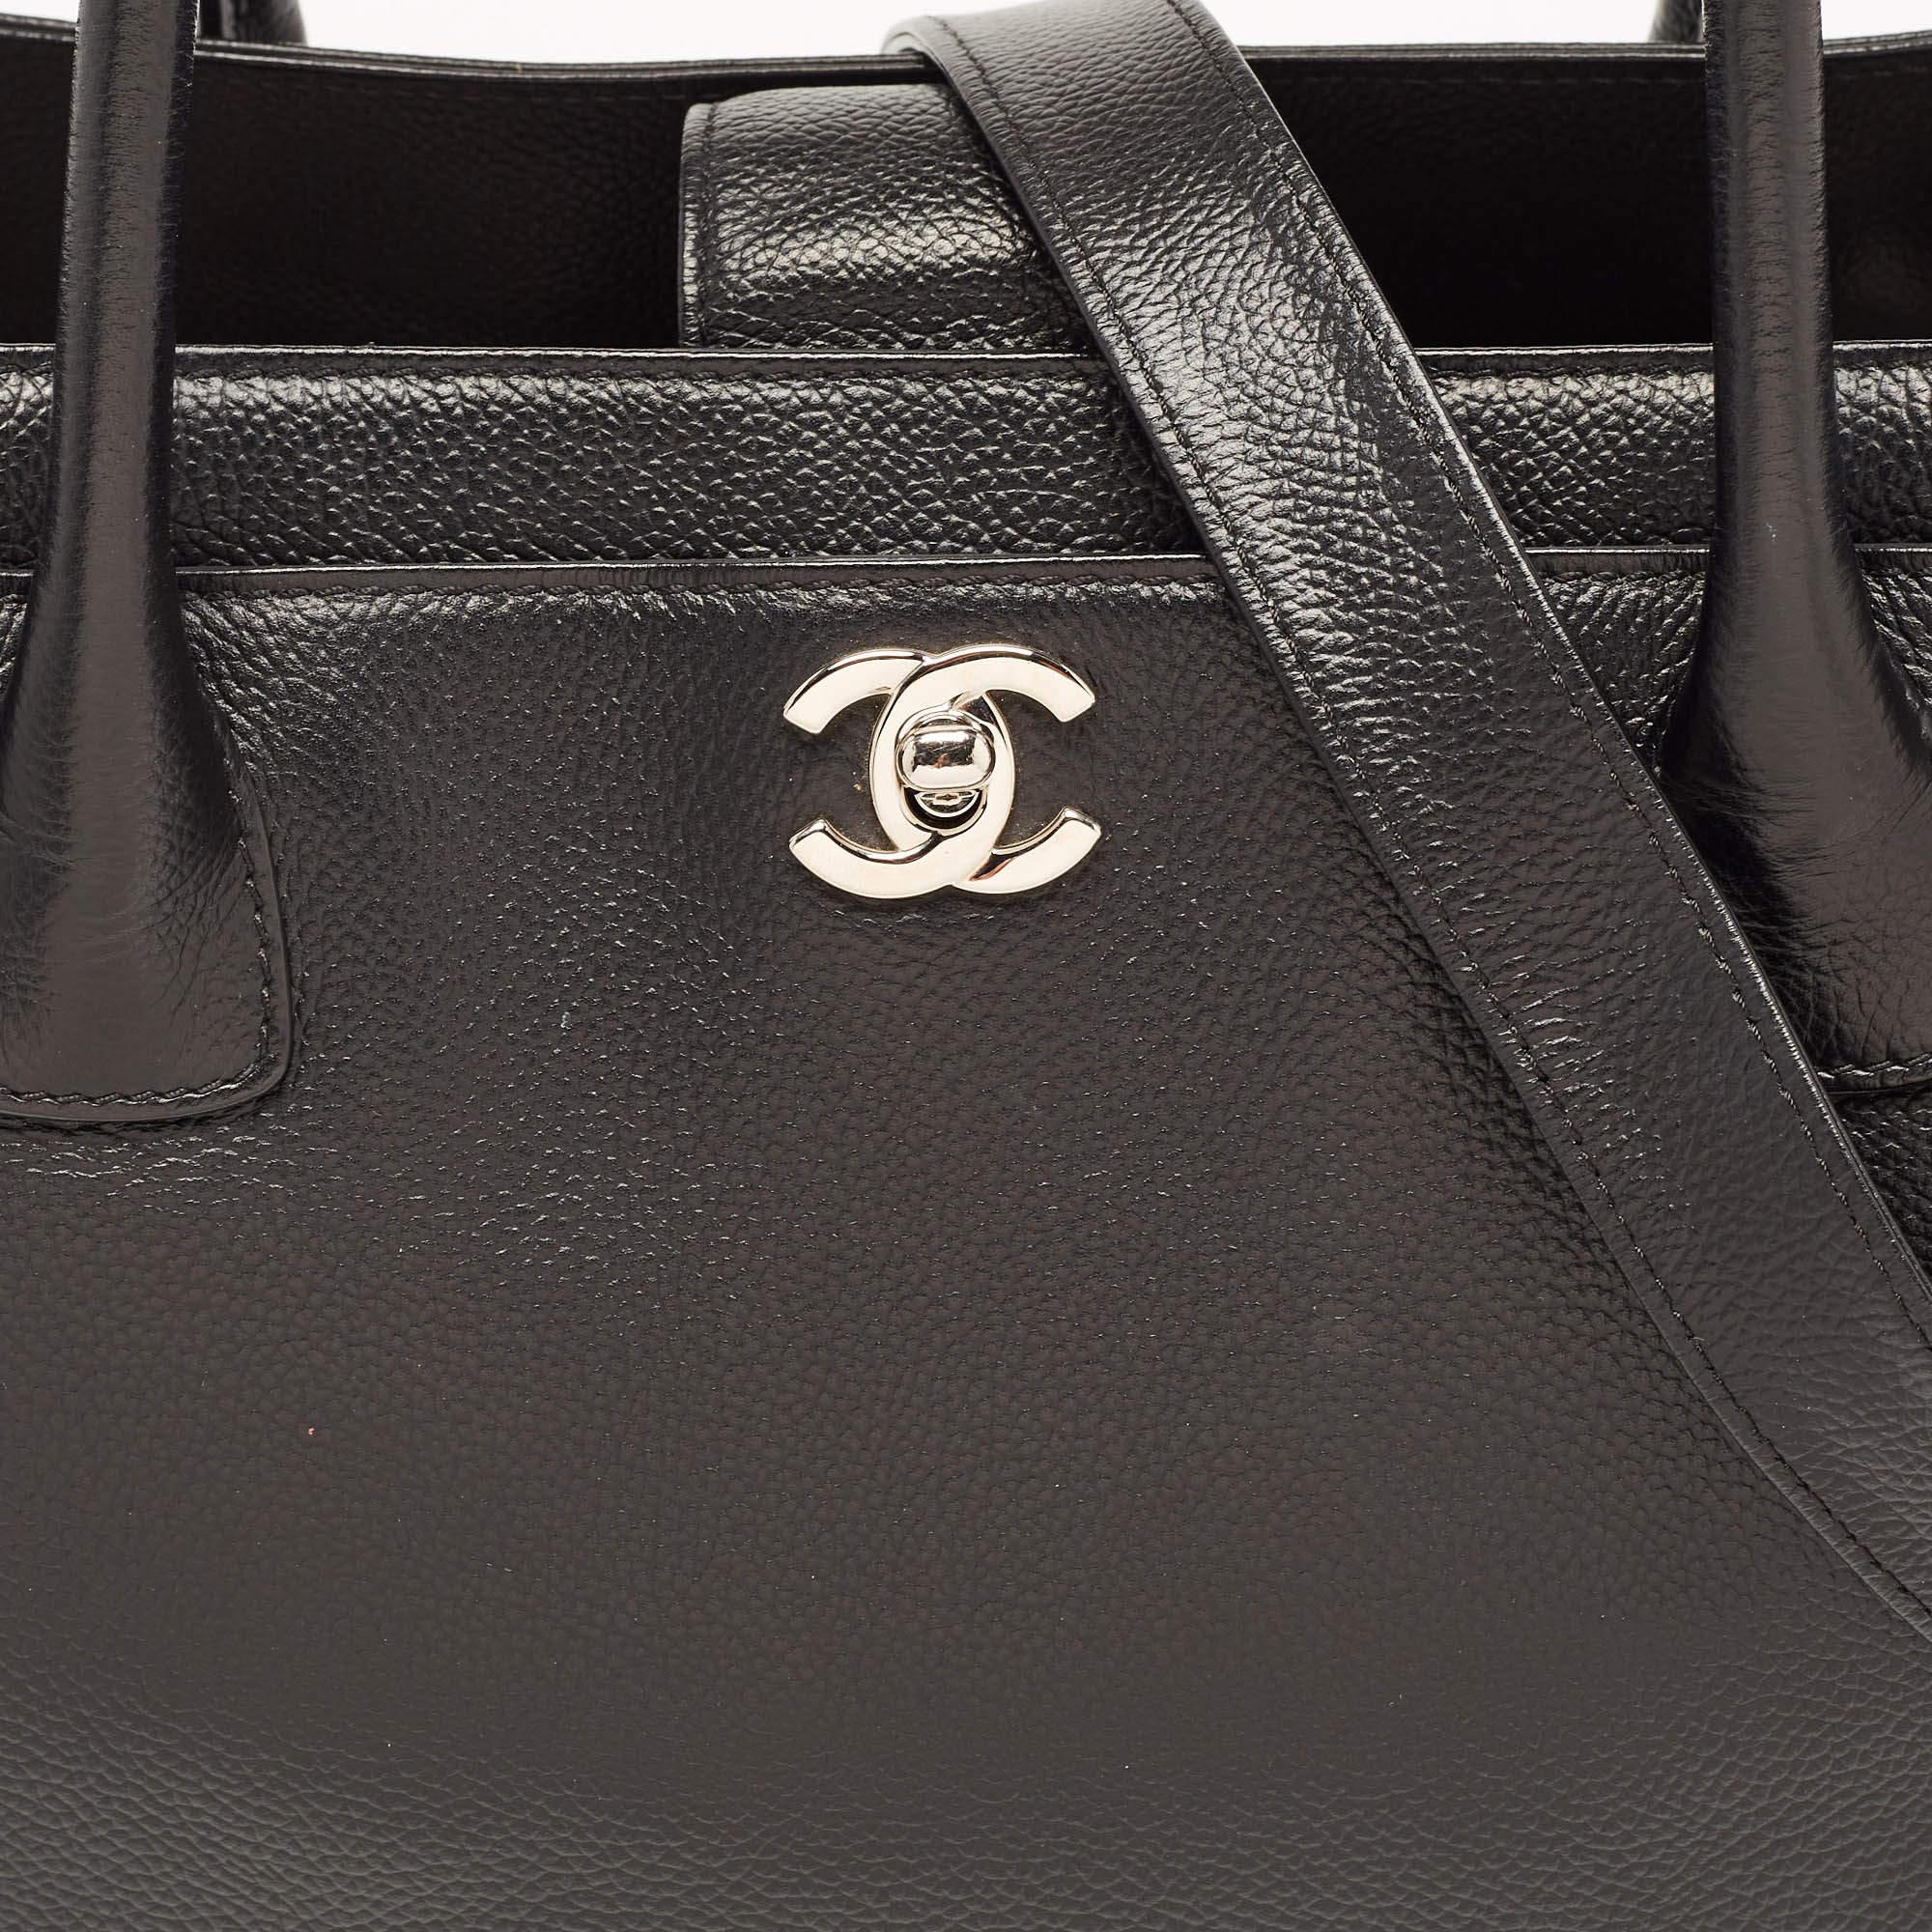 Chanel Black Leather Cerf Shopper Tote 10